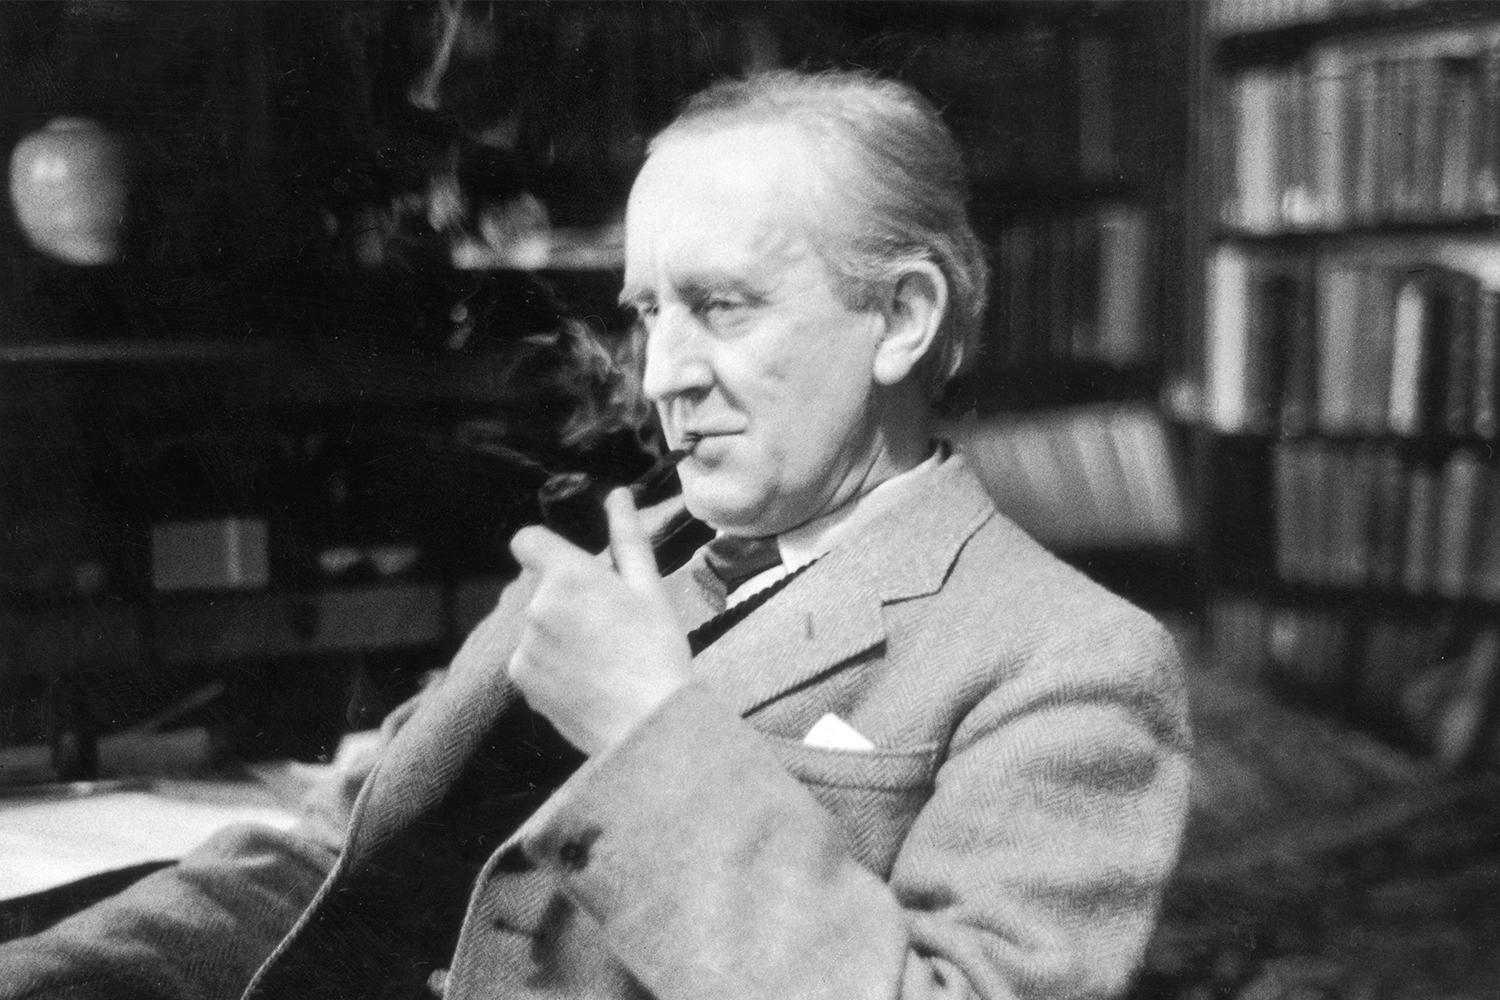 J.R.R. Tolkien Author of "The Lord of the Rings"